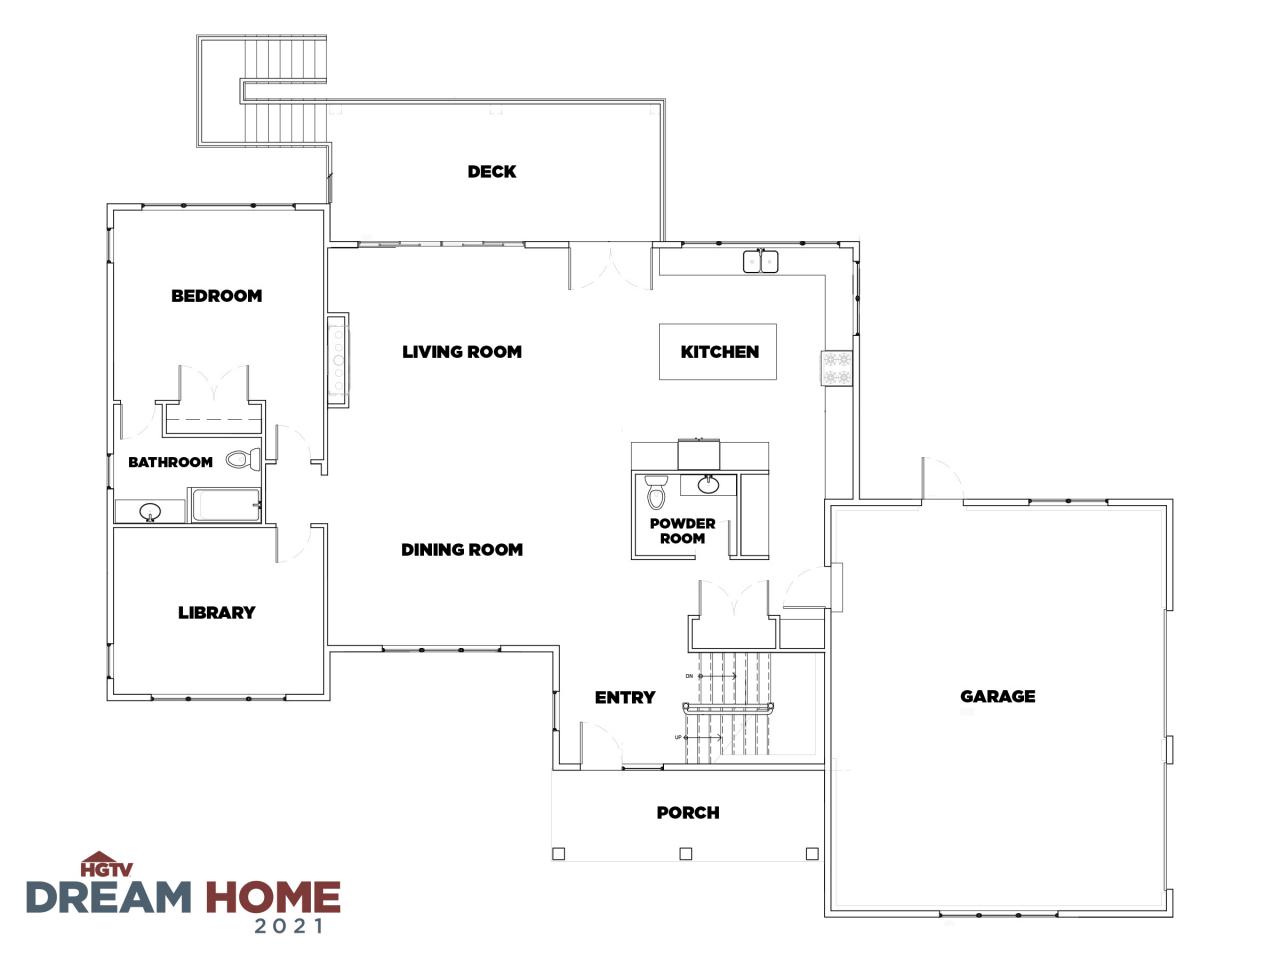 Floor Plan Of My Dream House Dream House Plans Find Your Dream House